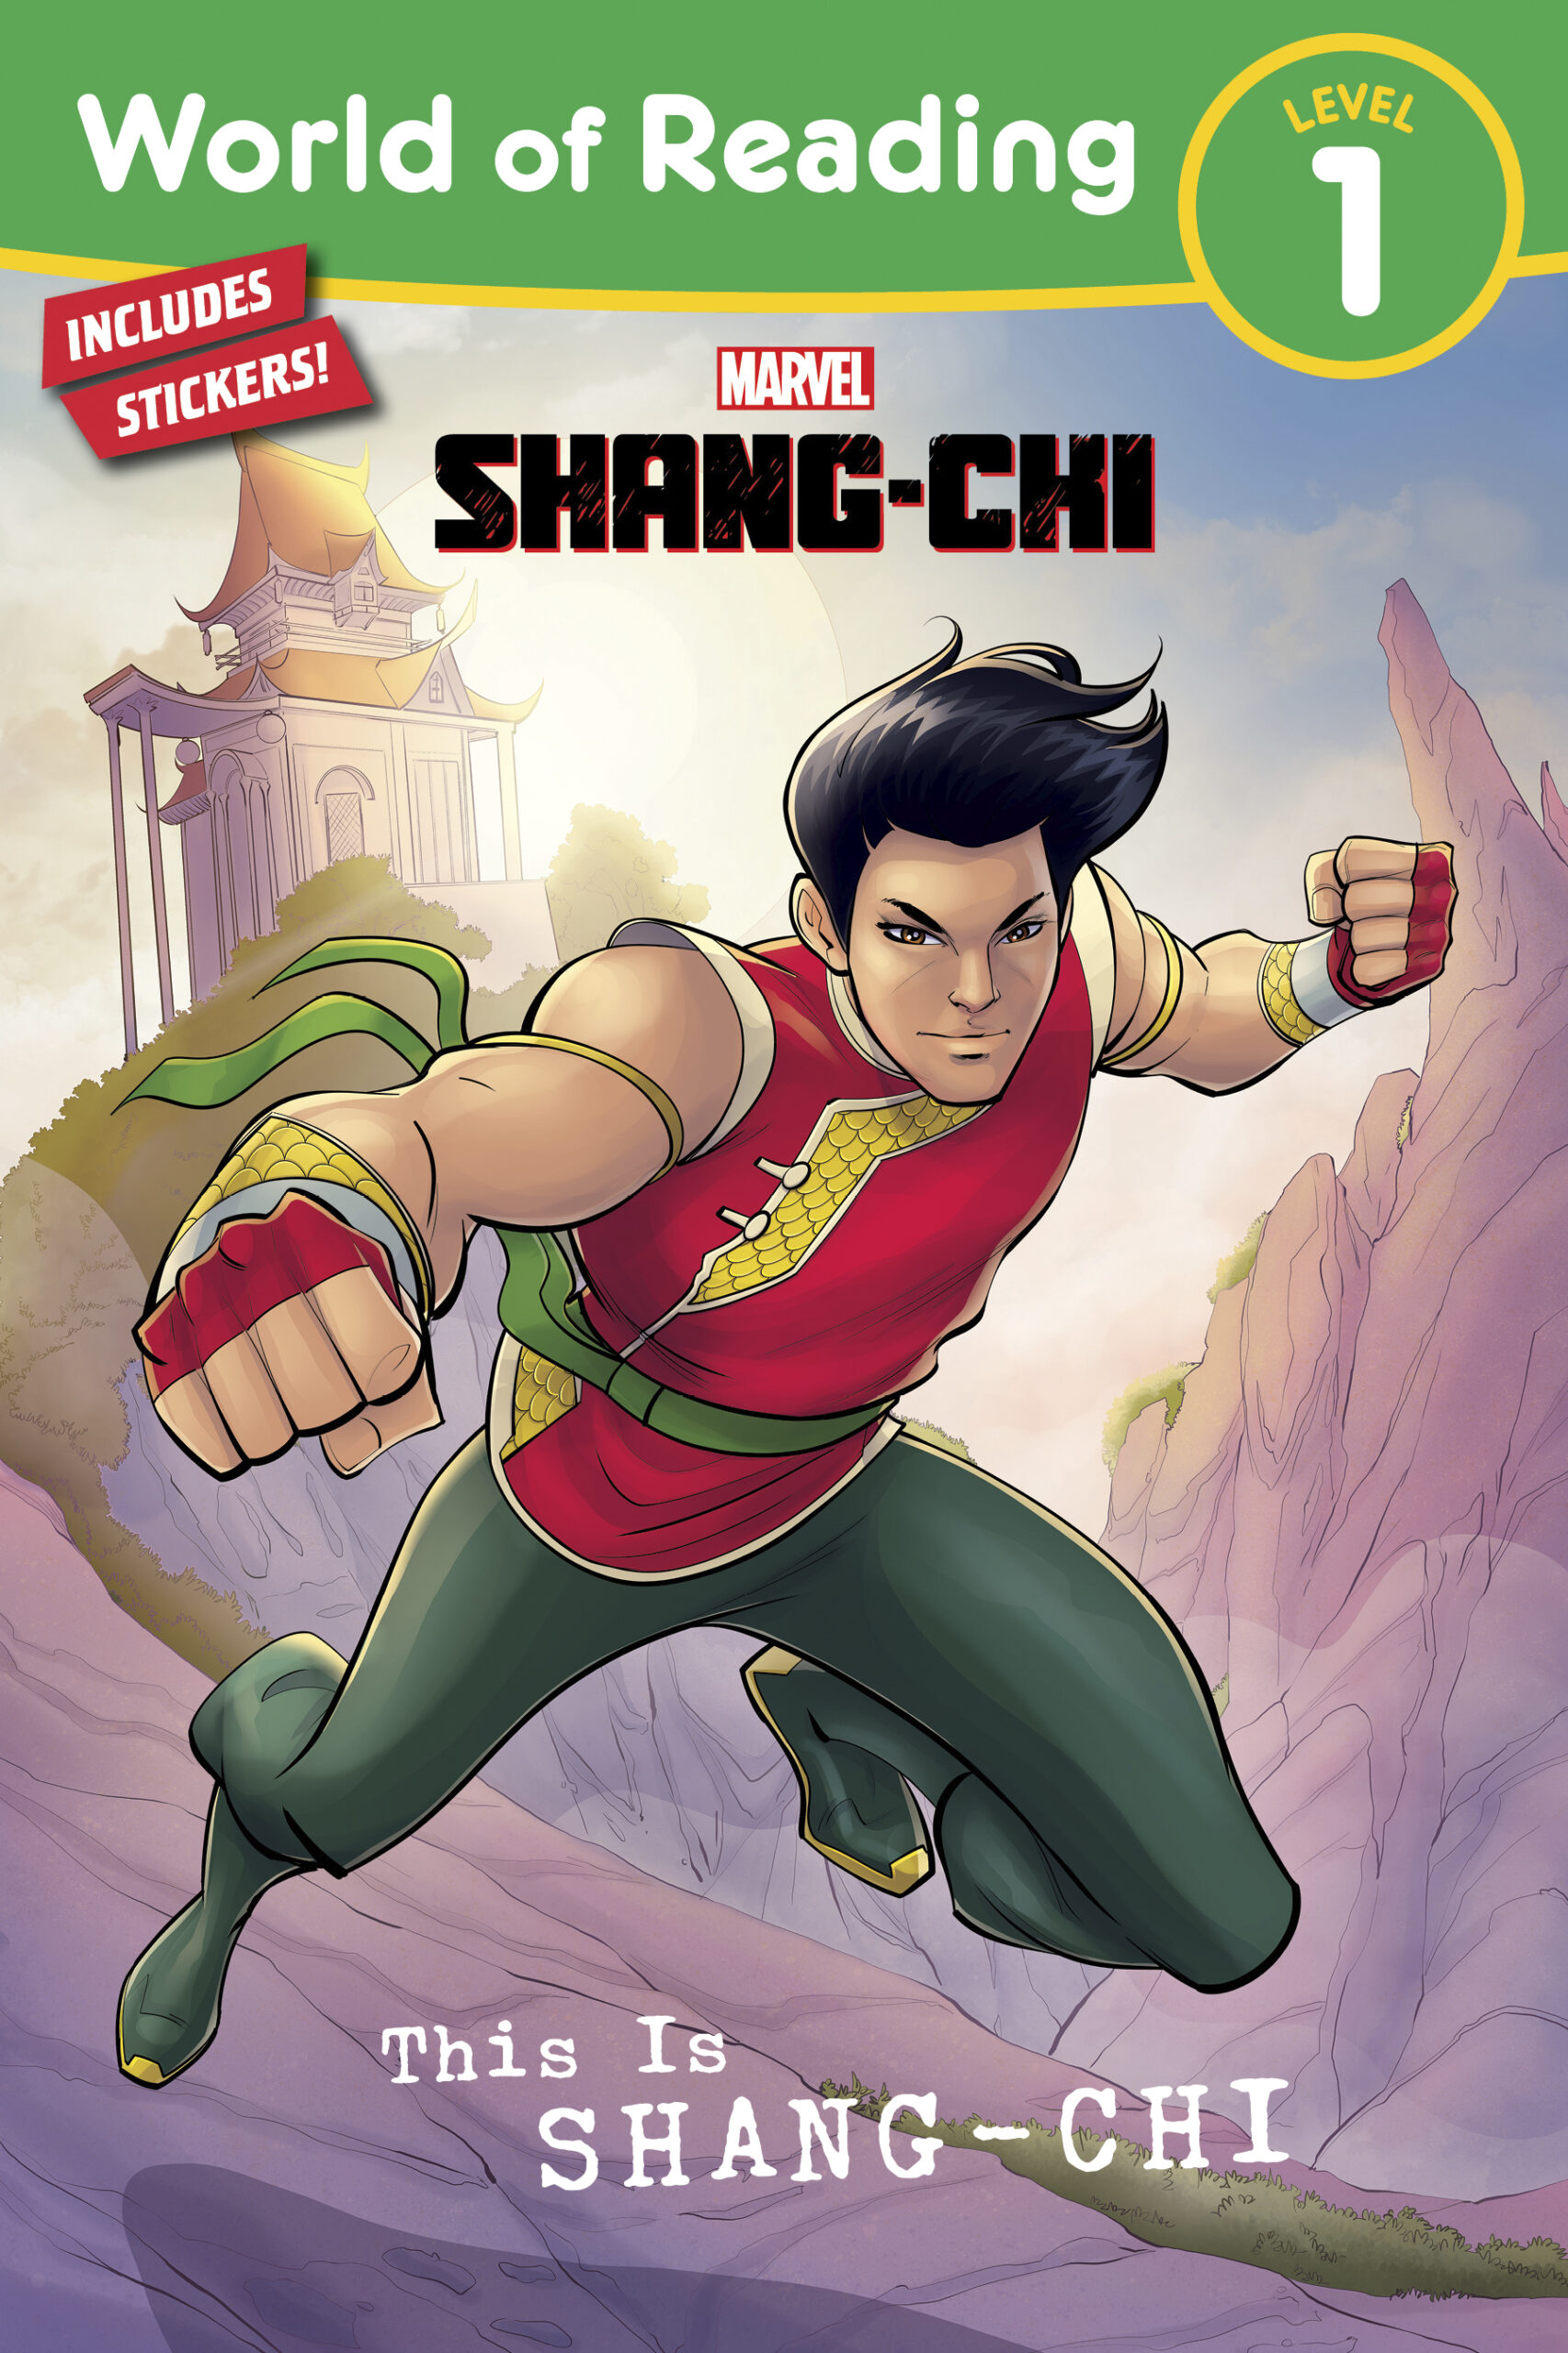 World of Reading: This is Shang-Chi by Marvel Press Book Group - World of  Reading - Marvel, Shang-Chi Books